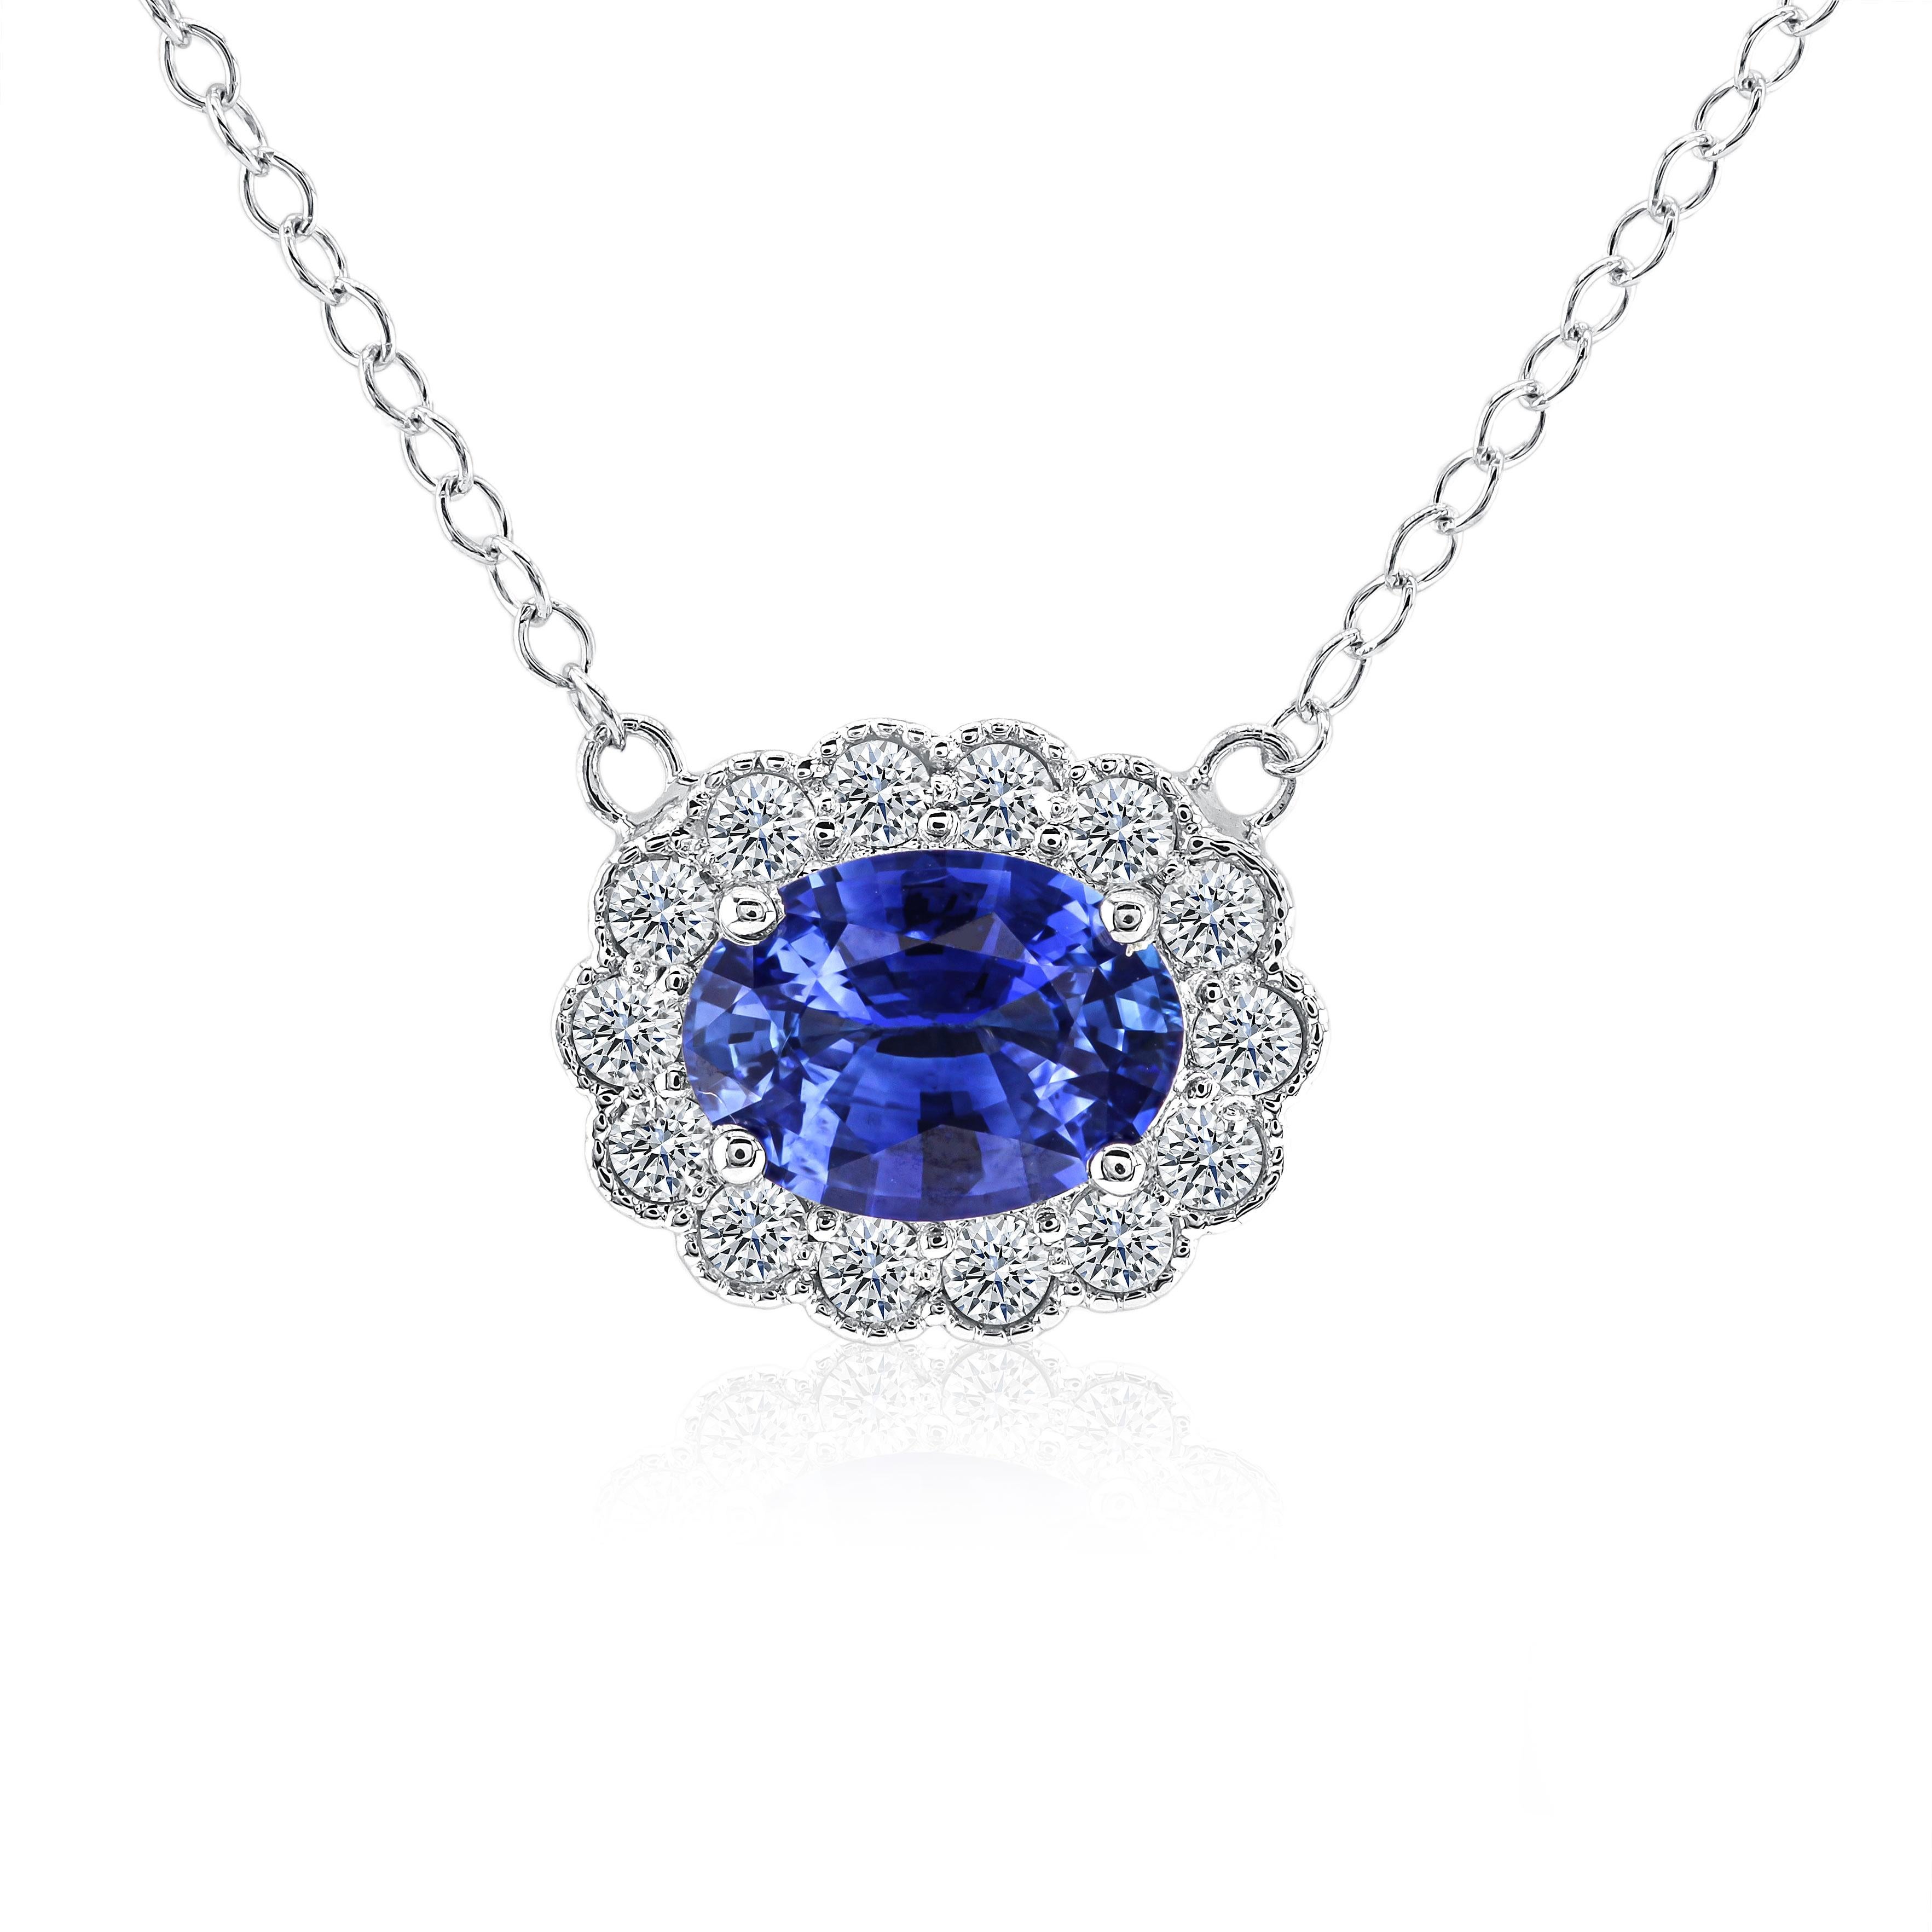 The epitome of opulence, this pendant features a 1.39 carat oval-cut sapphire, enveloped by a resplendent halo of 0.42 carats of round, natural white diamonds. The impeccable craftsmanship is evident in the intricate milgrain work meticulously